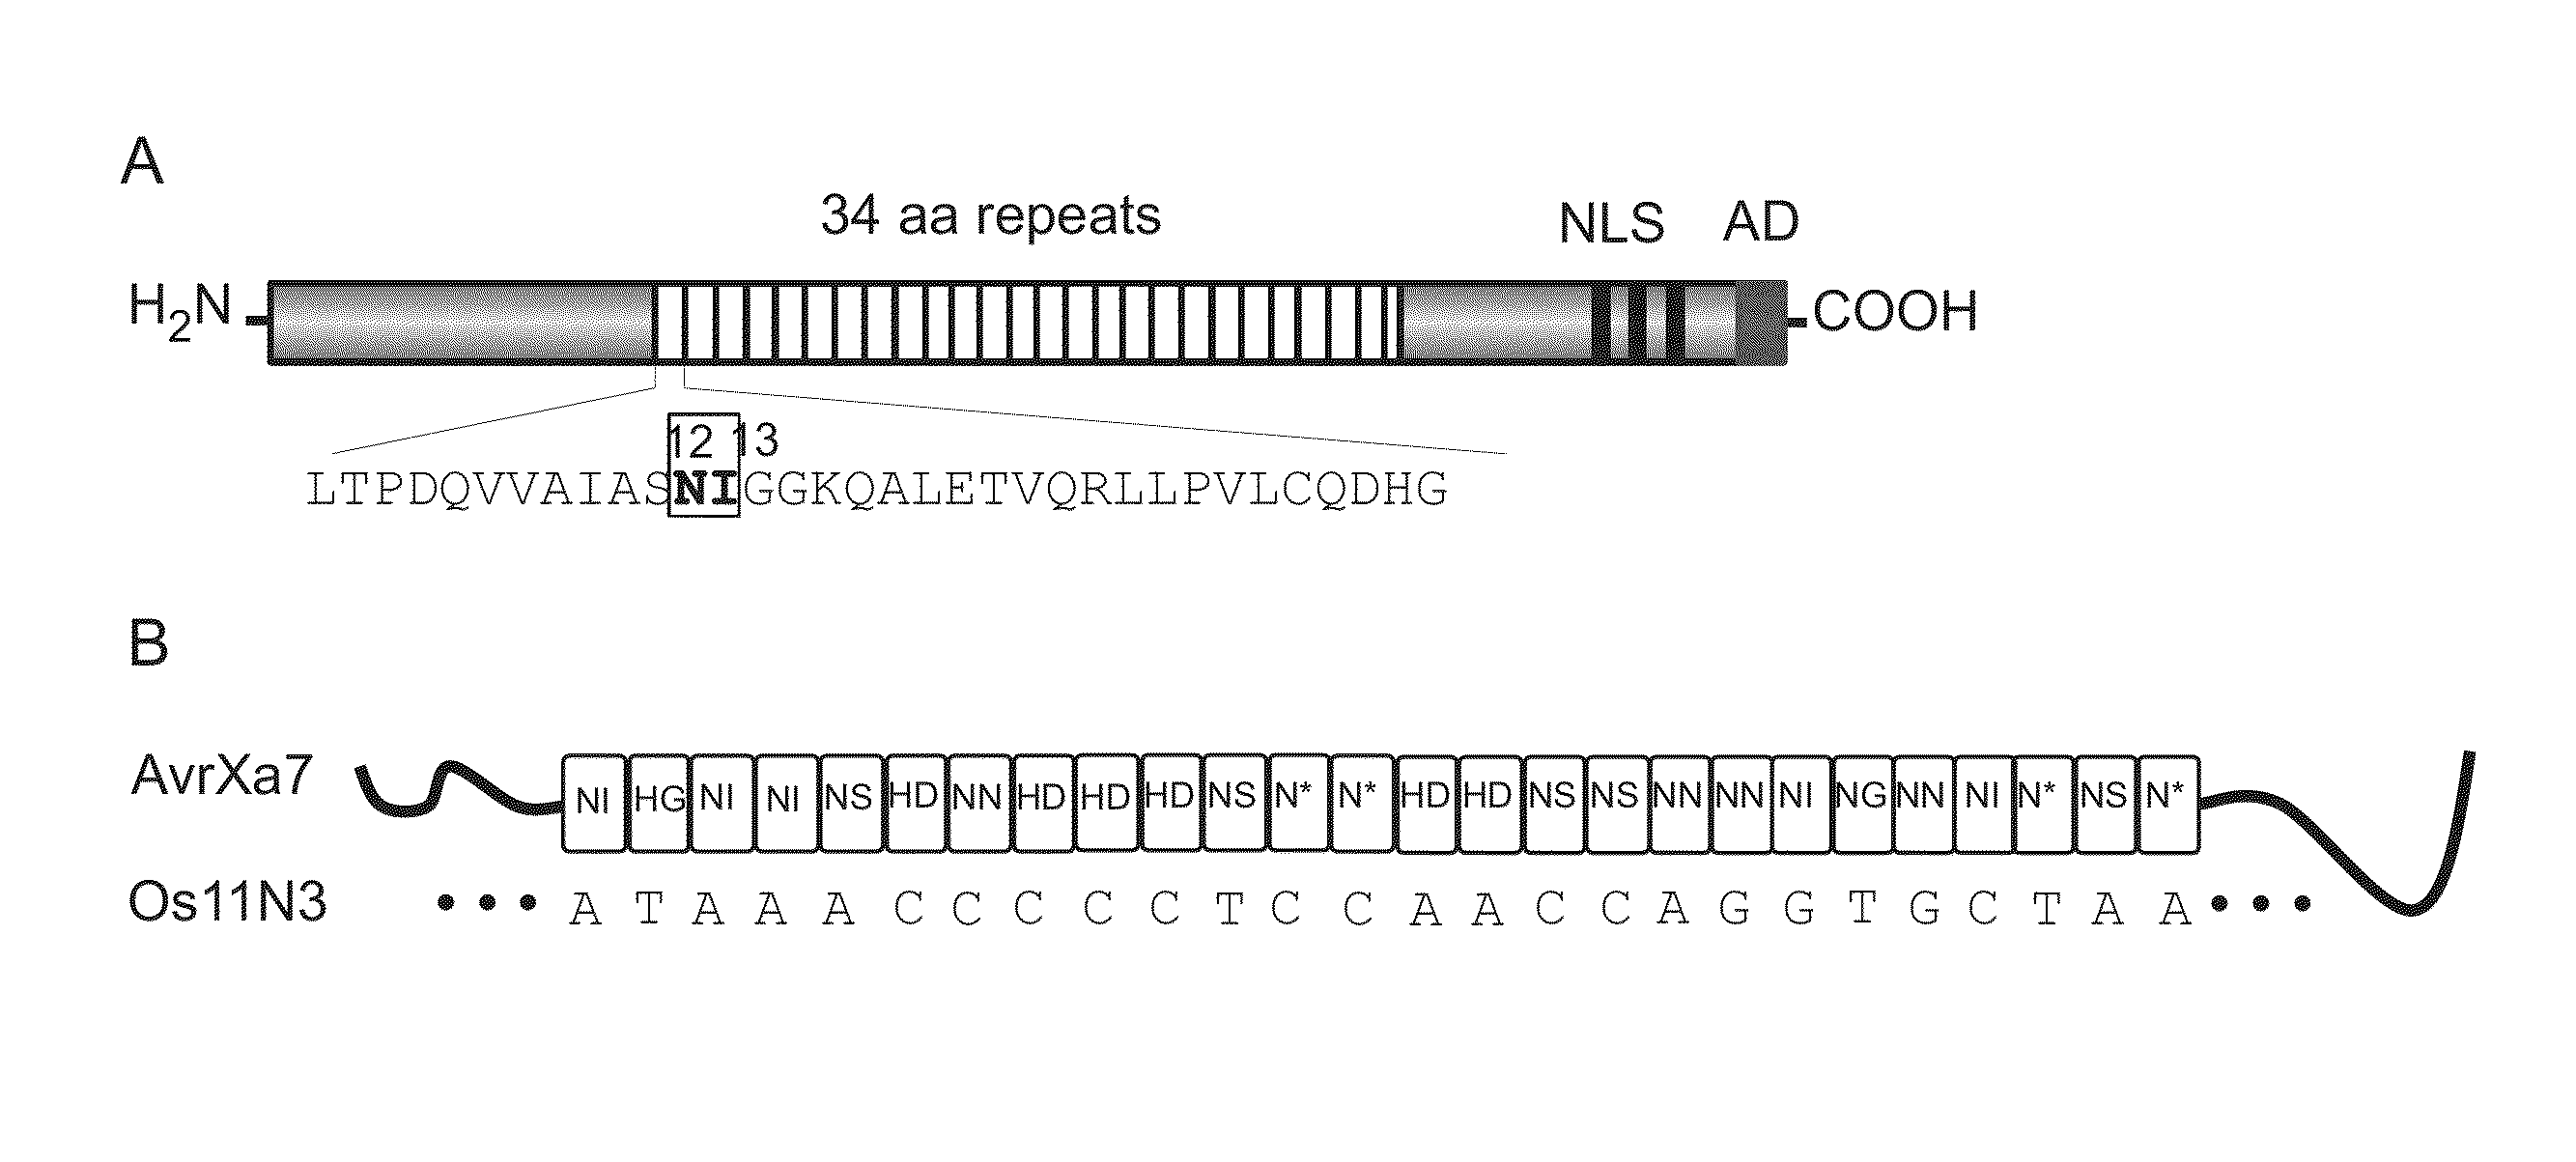 Nuclease activity of tal effector and foki fusion protein